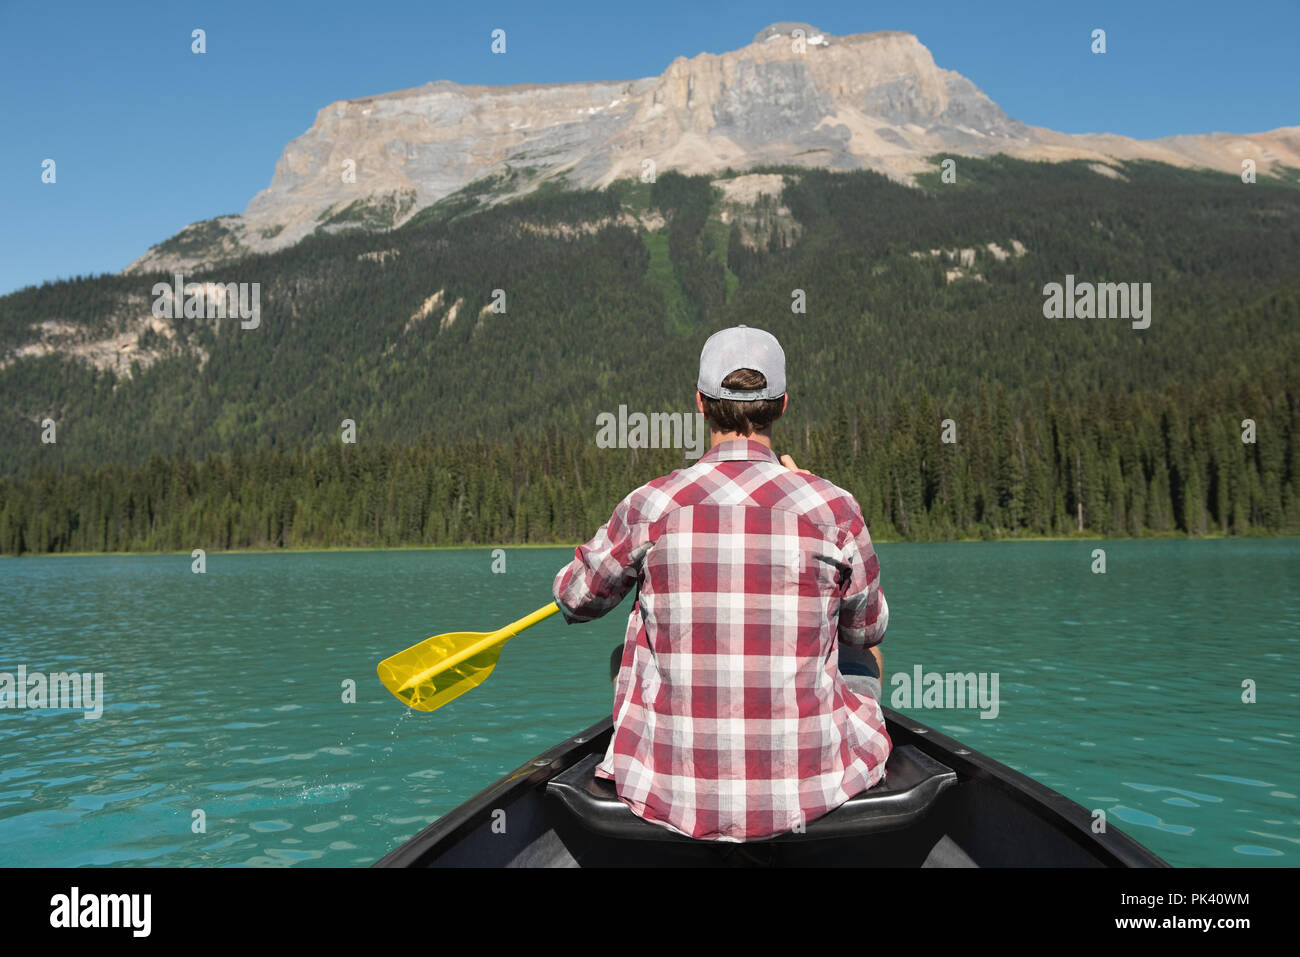 Man rowing a boat in river at countryside Stock Photo